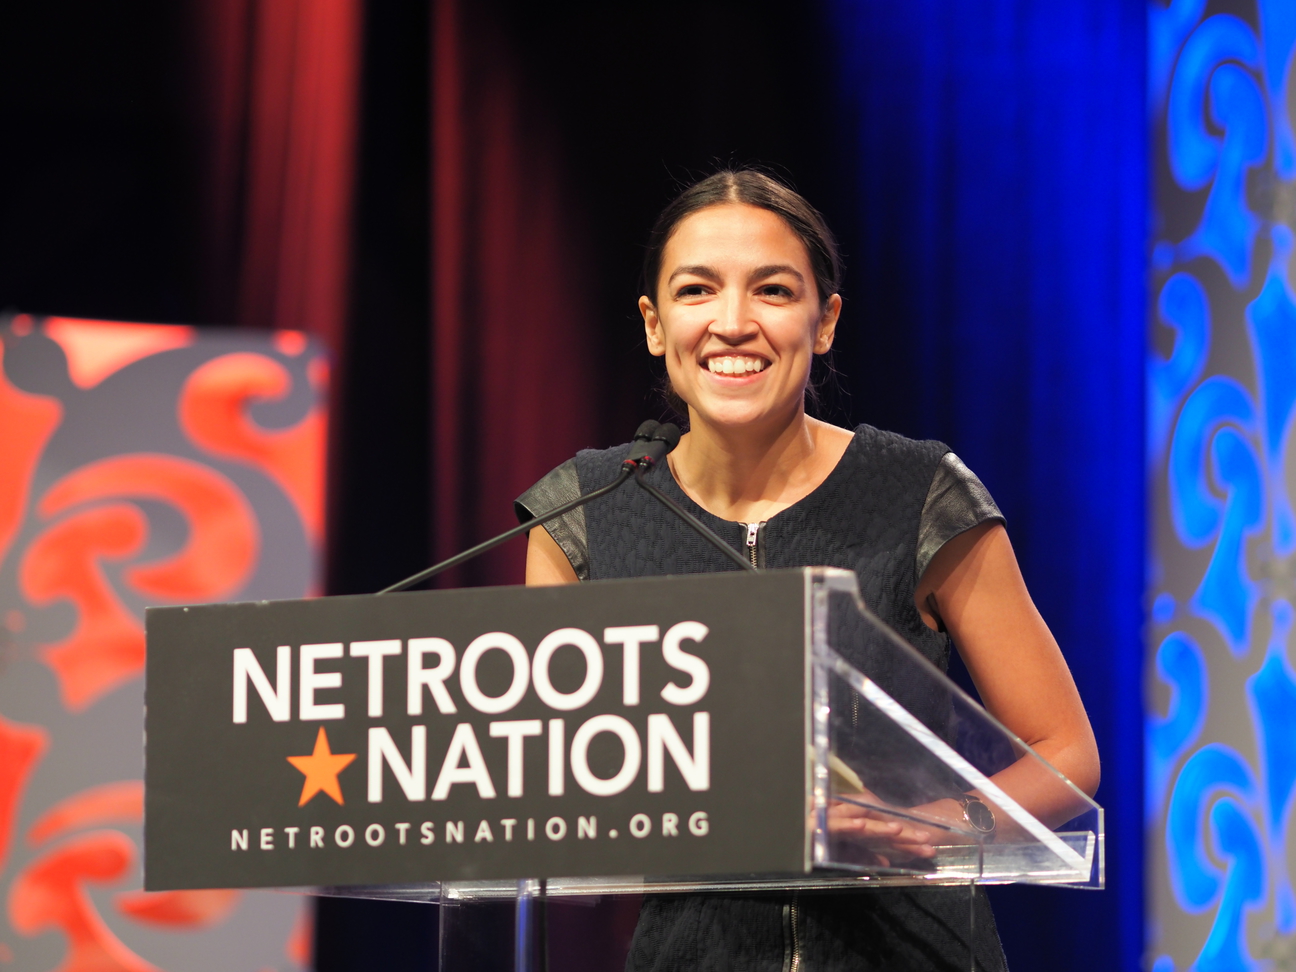 Alexandria Ocasio-Cortez, the Democratic nominee in NY-14, addresses Netroots Nation 2018 during the closing plenary